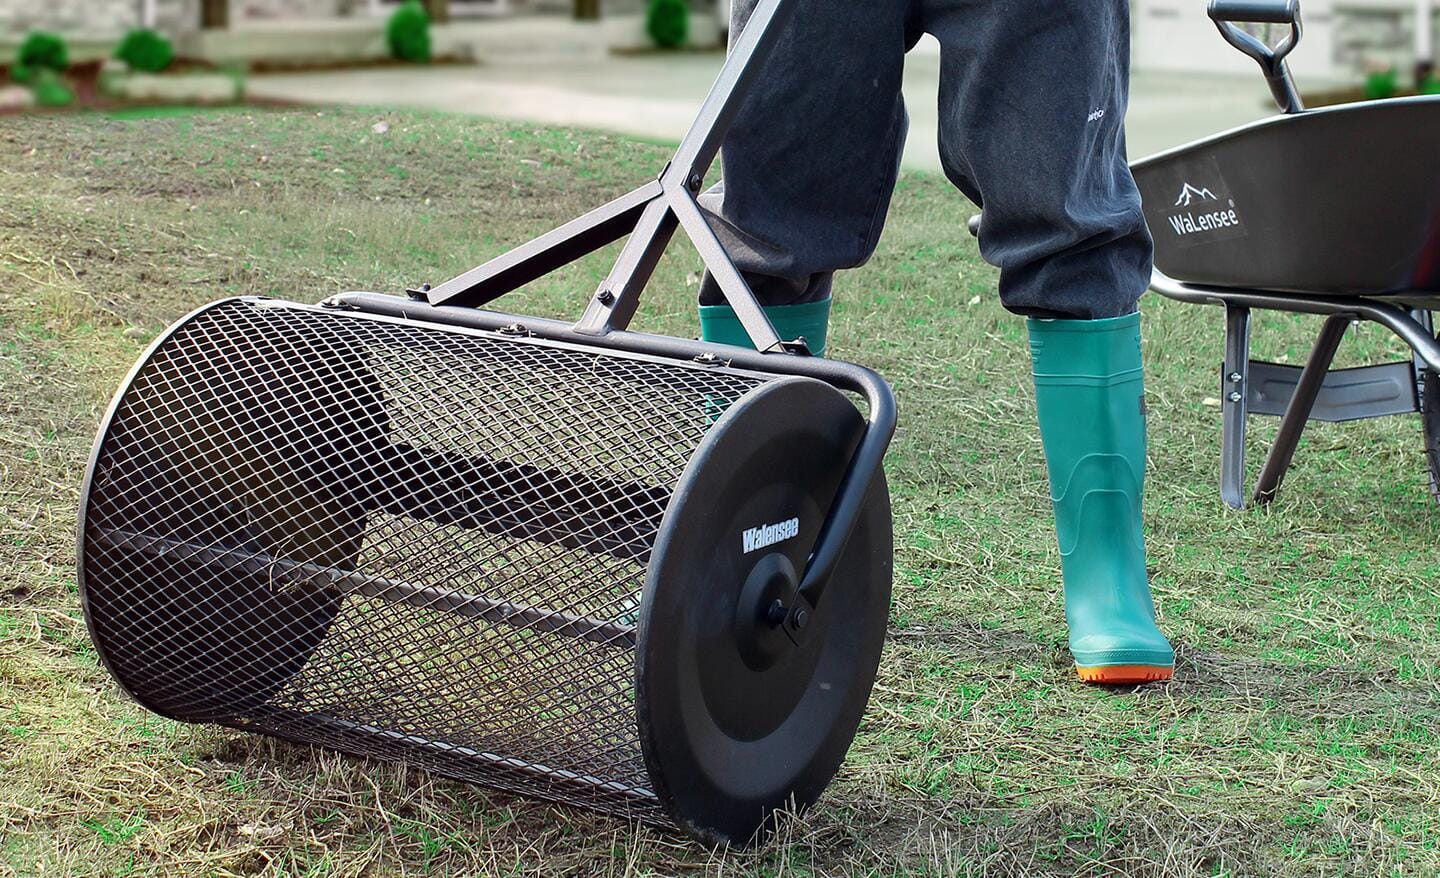 Gardener pushing a compost spreader on a lawn